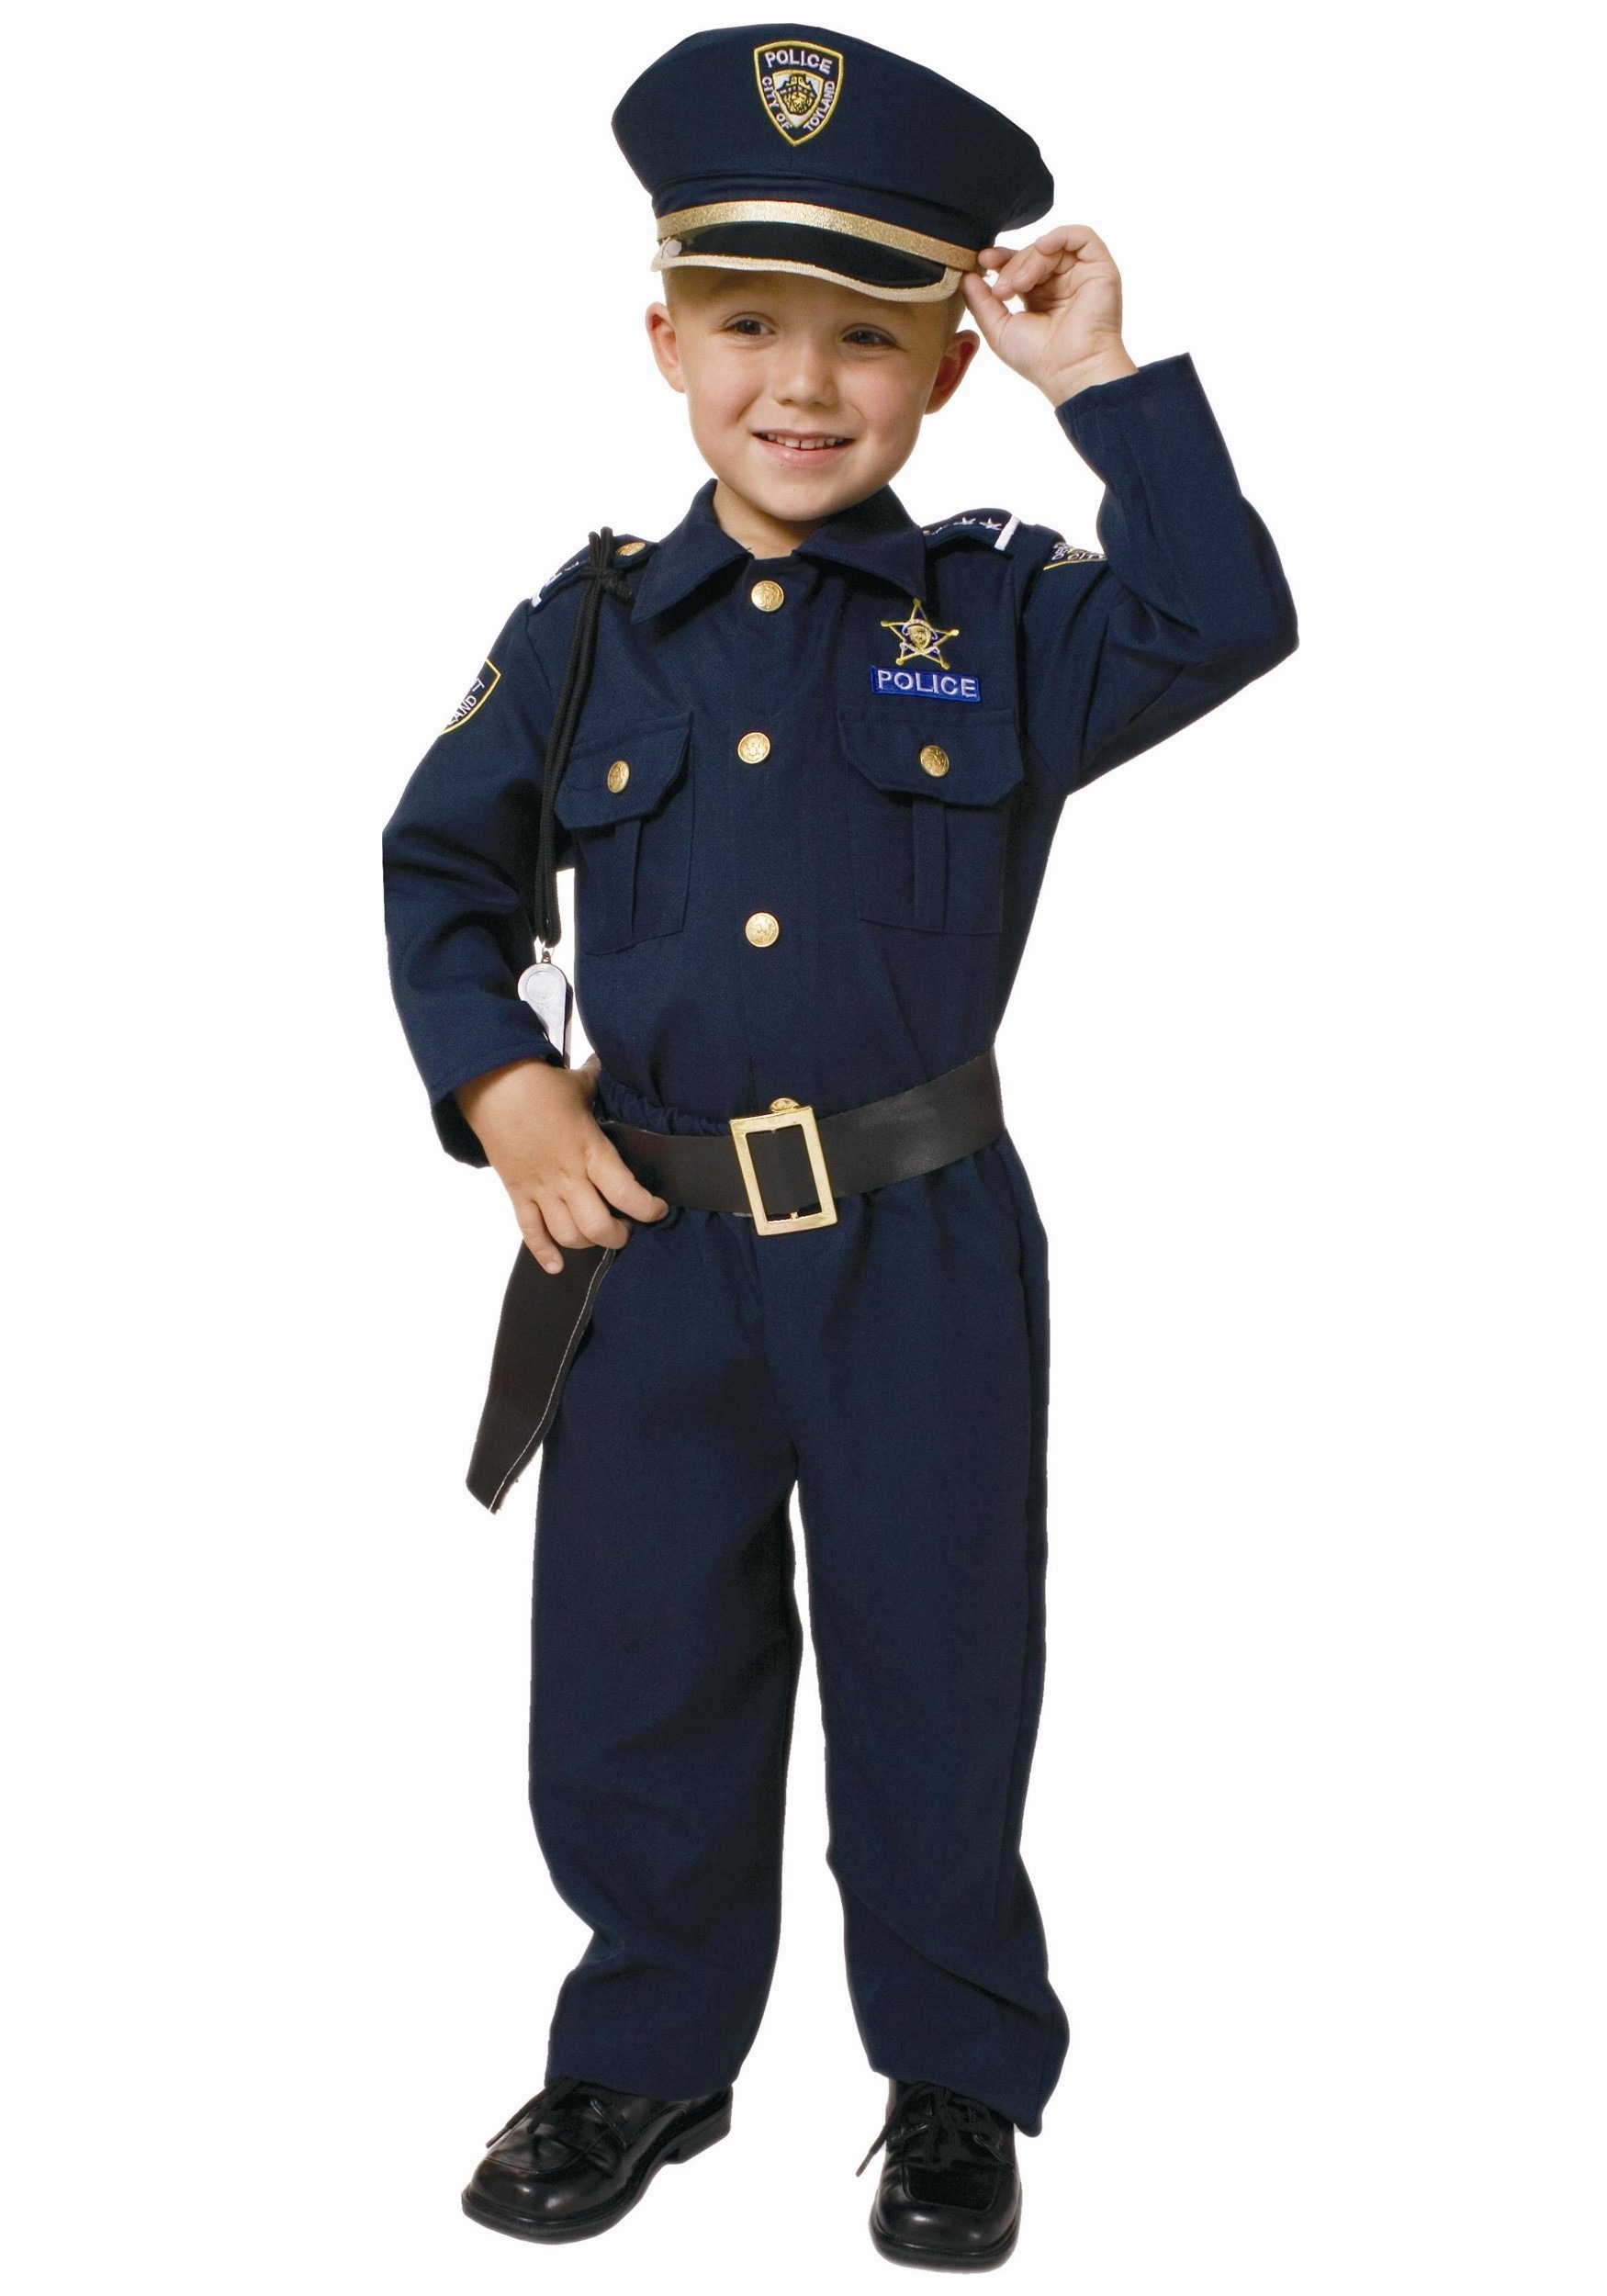 Child Deluxe Police Officer Costume -  Dress Up America, 201-M